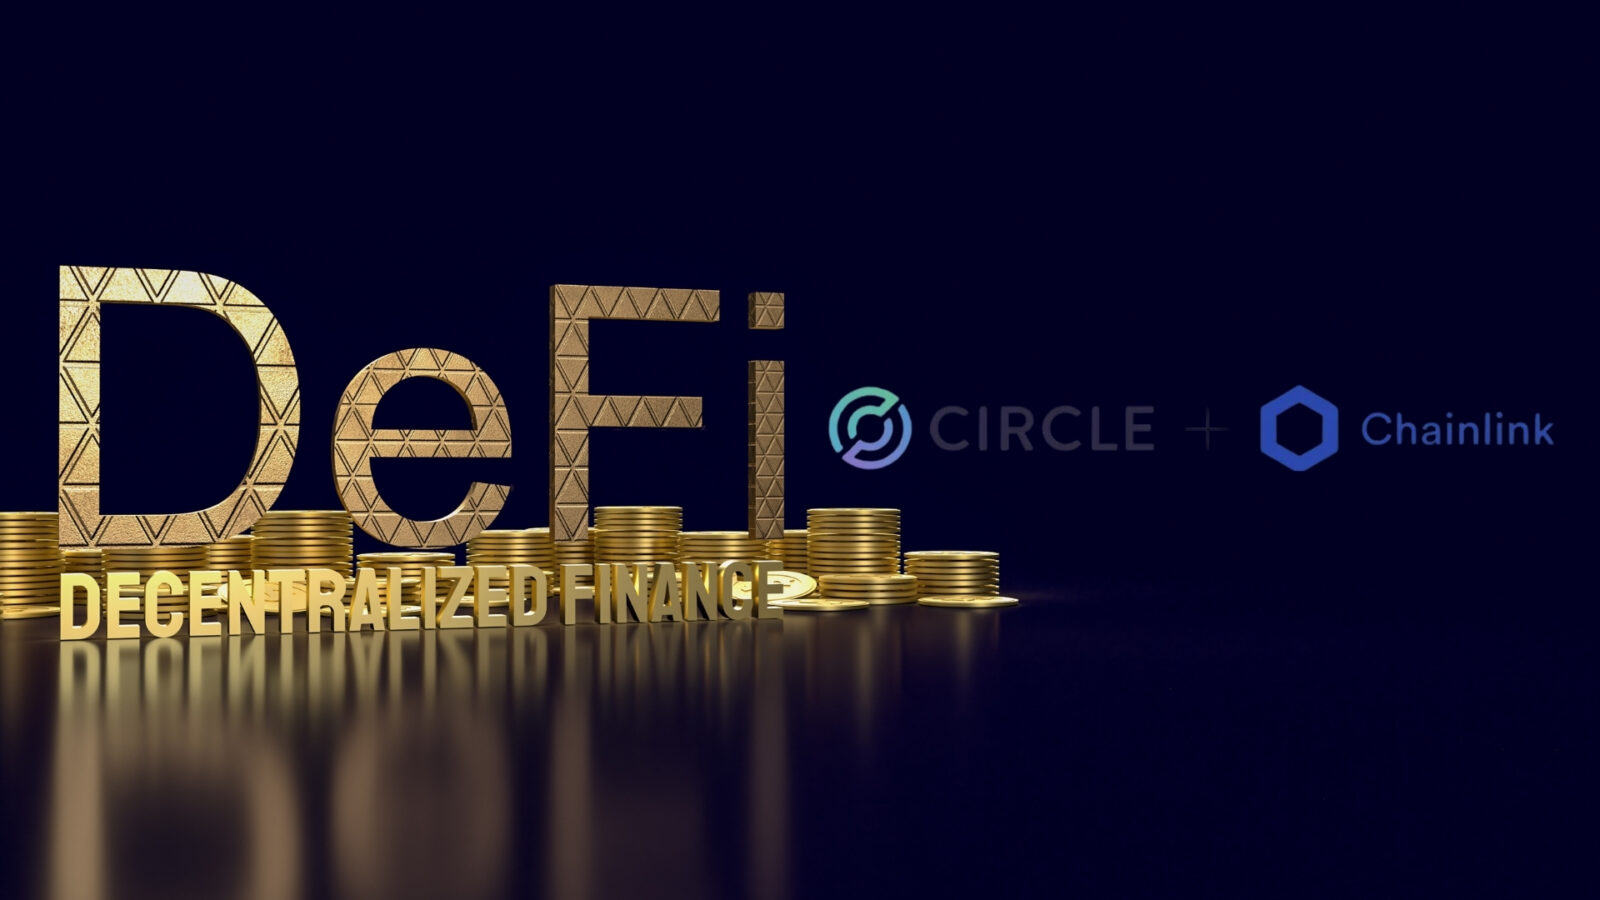 Chainlink and Circle Partner to Boost DeFi Utilization